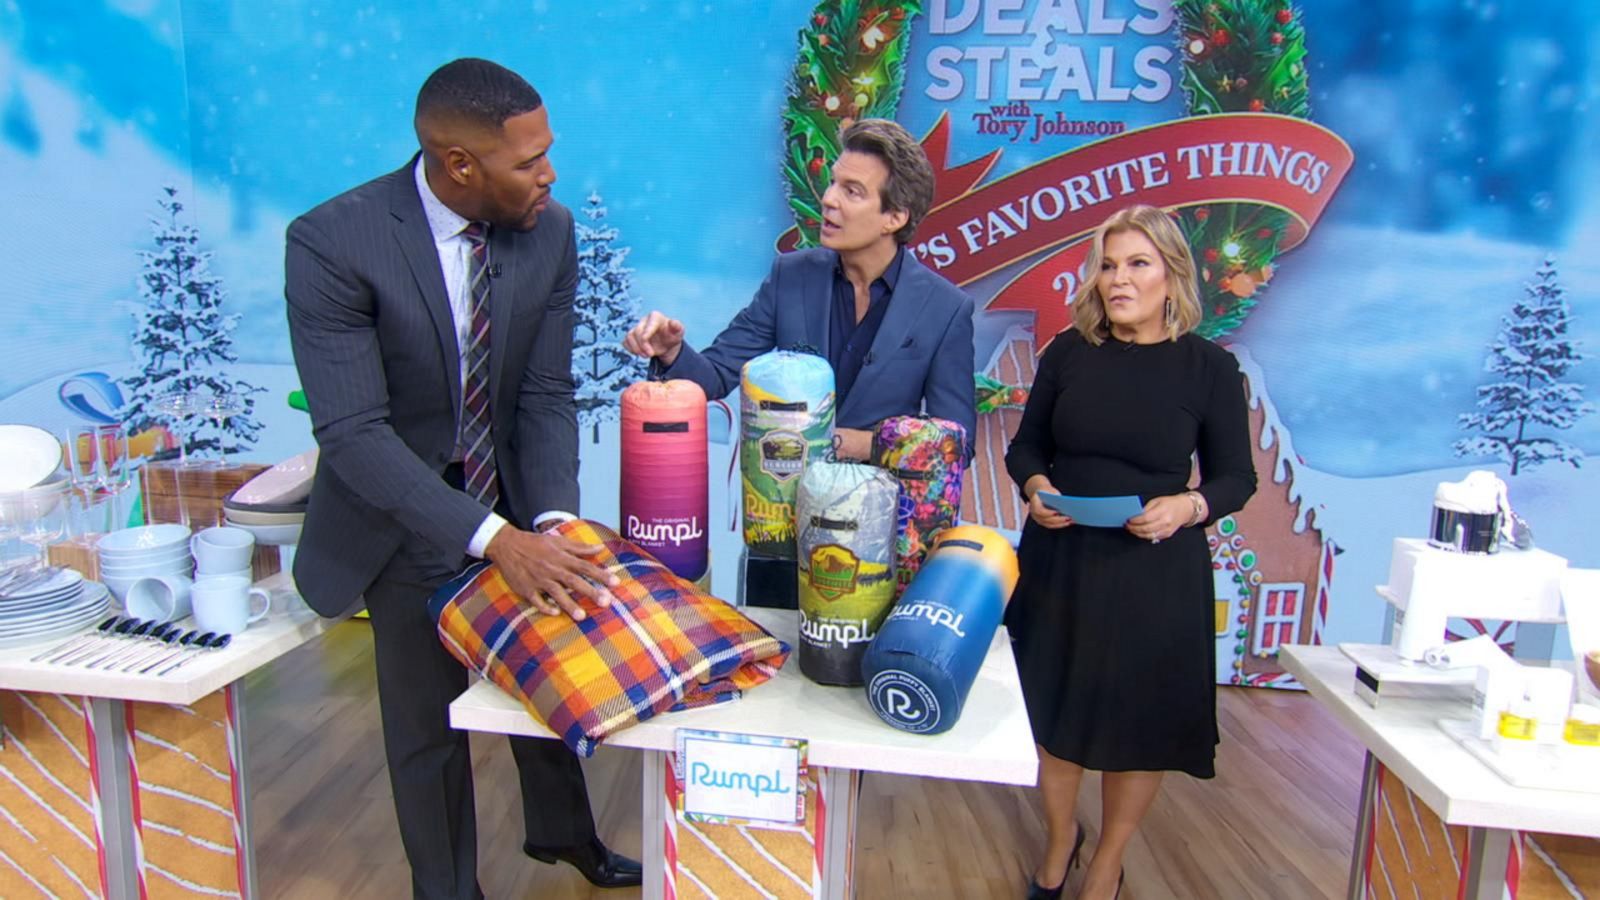 Deals and Steals on Oprah’s Favorite Things Good Morning America